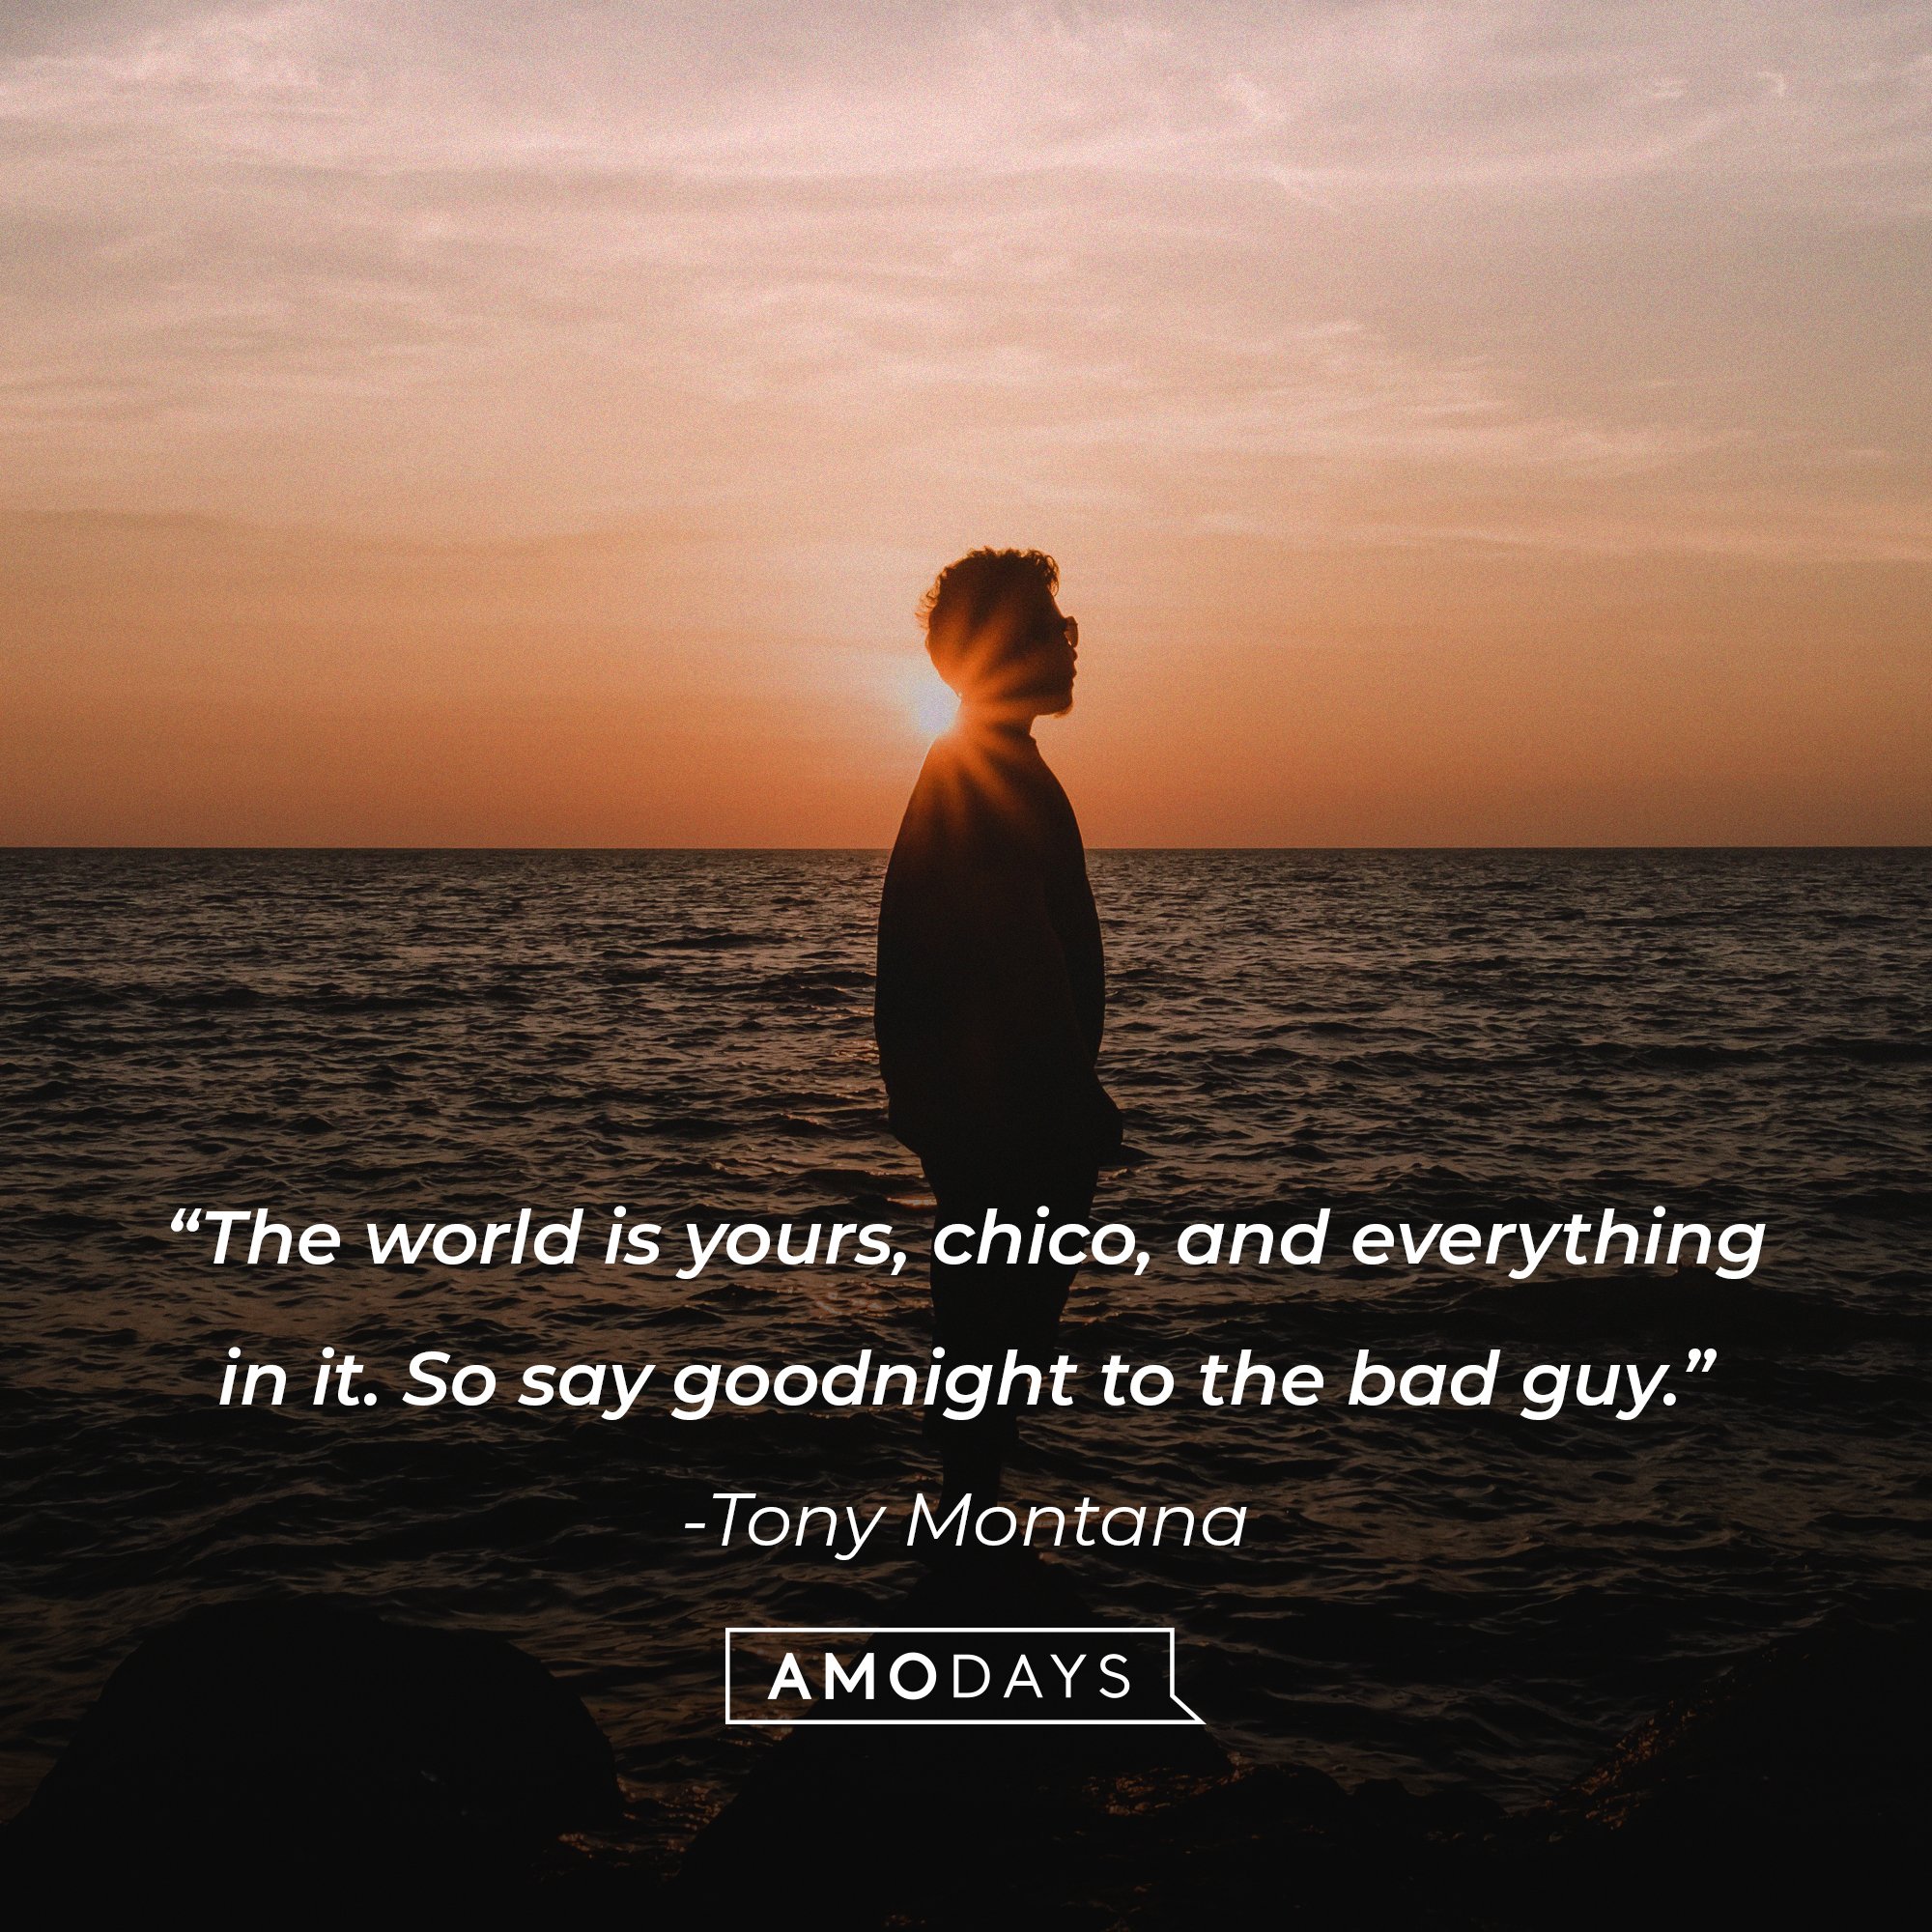  Tony Montana’s quote: “The world is yours, chico, and everything in it. So say goodnight to the bad guy.”  | Image: AmoDays